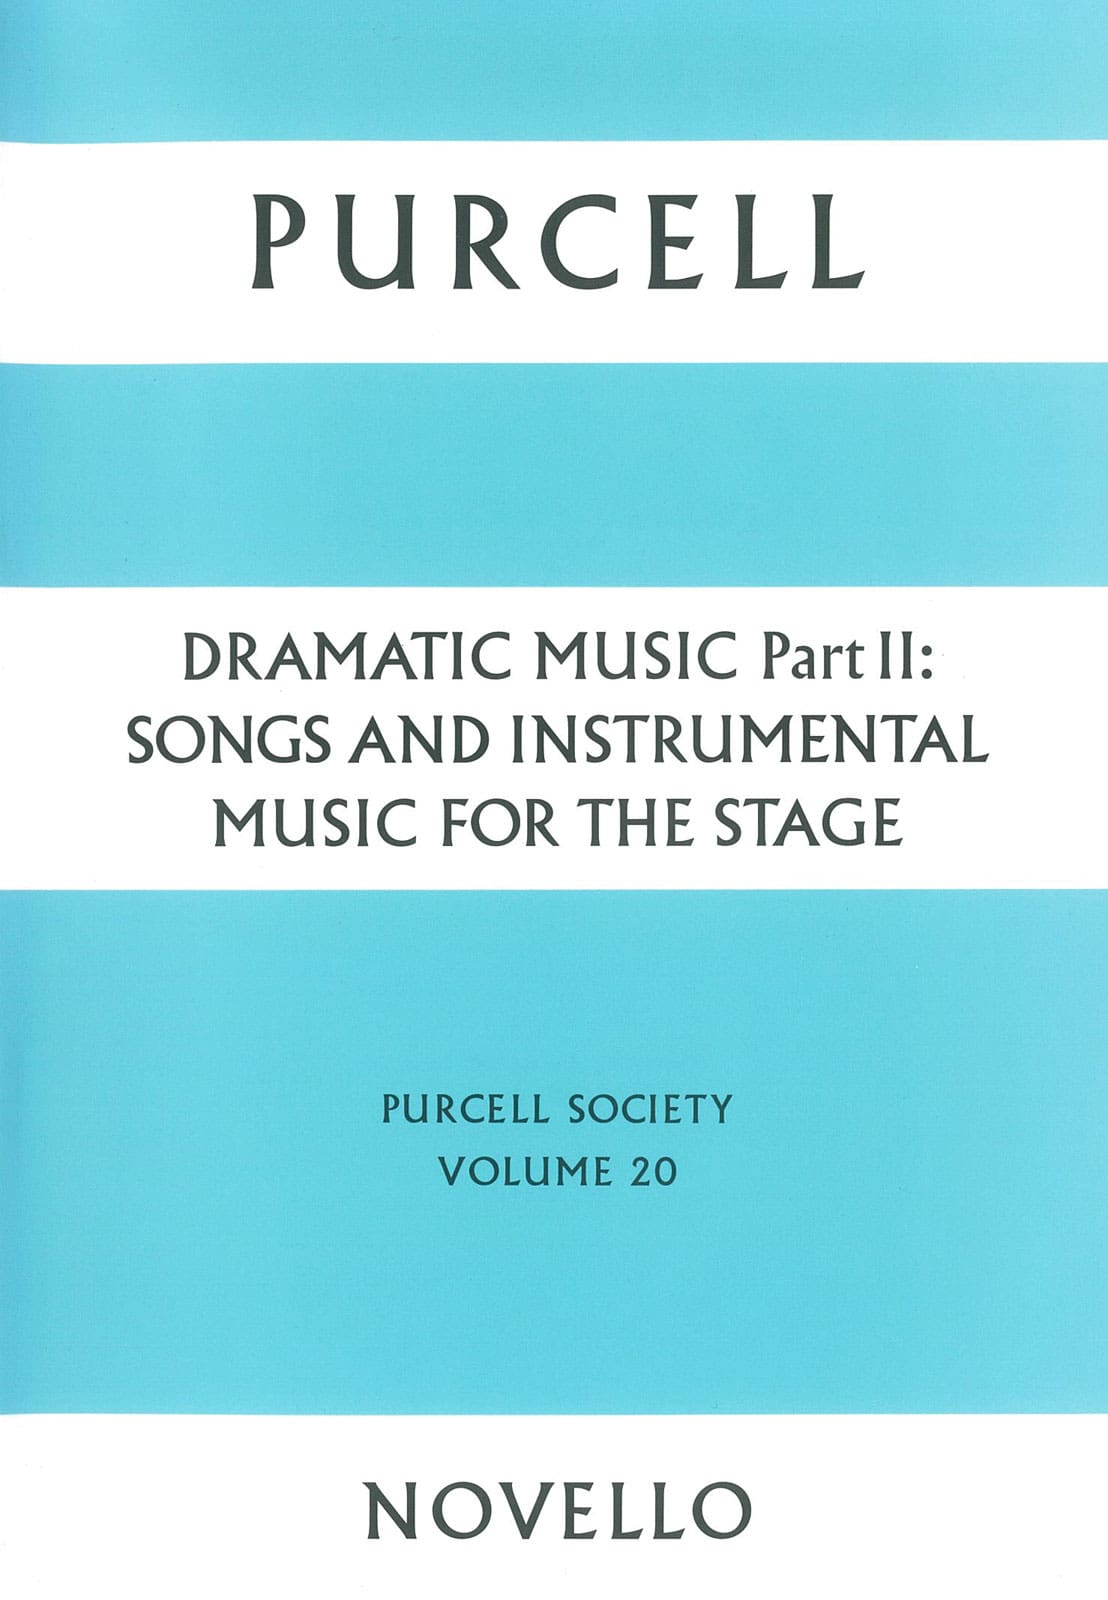 NOVELLO PURCELL HENRY - THE WORKS OF HENRY PURCELL - SONGS AND INSTRUMENTAL MUSIC FOR THE STAGE - OPERA